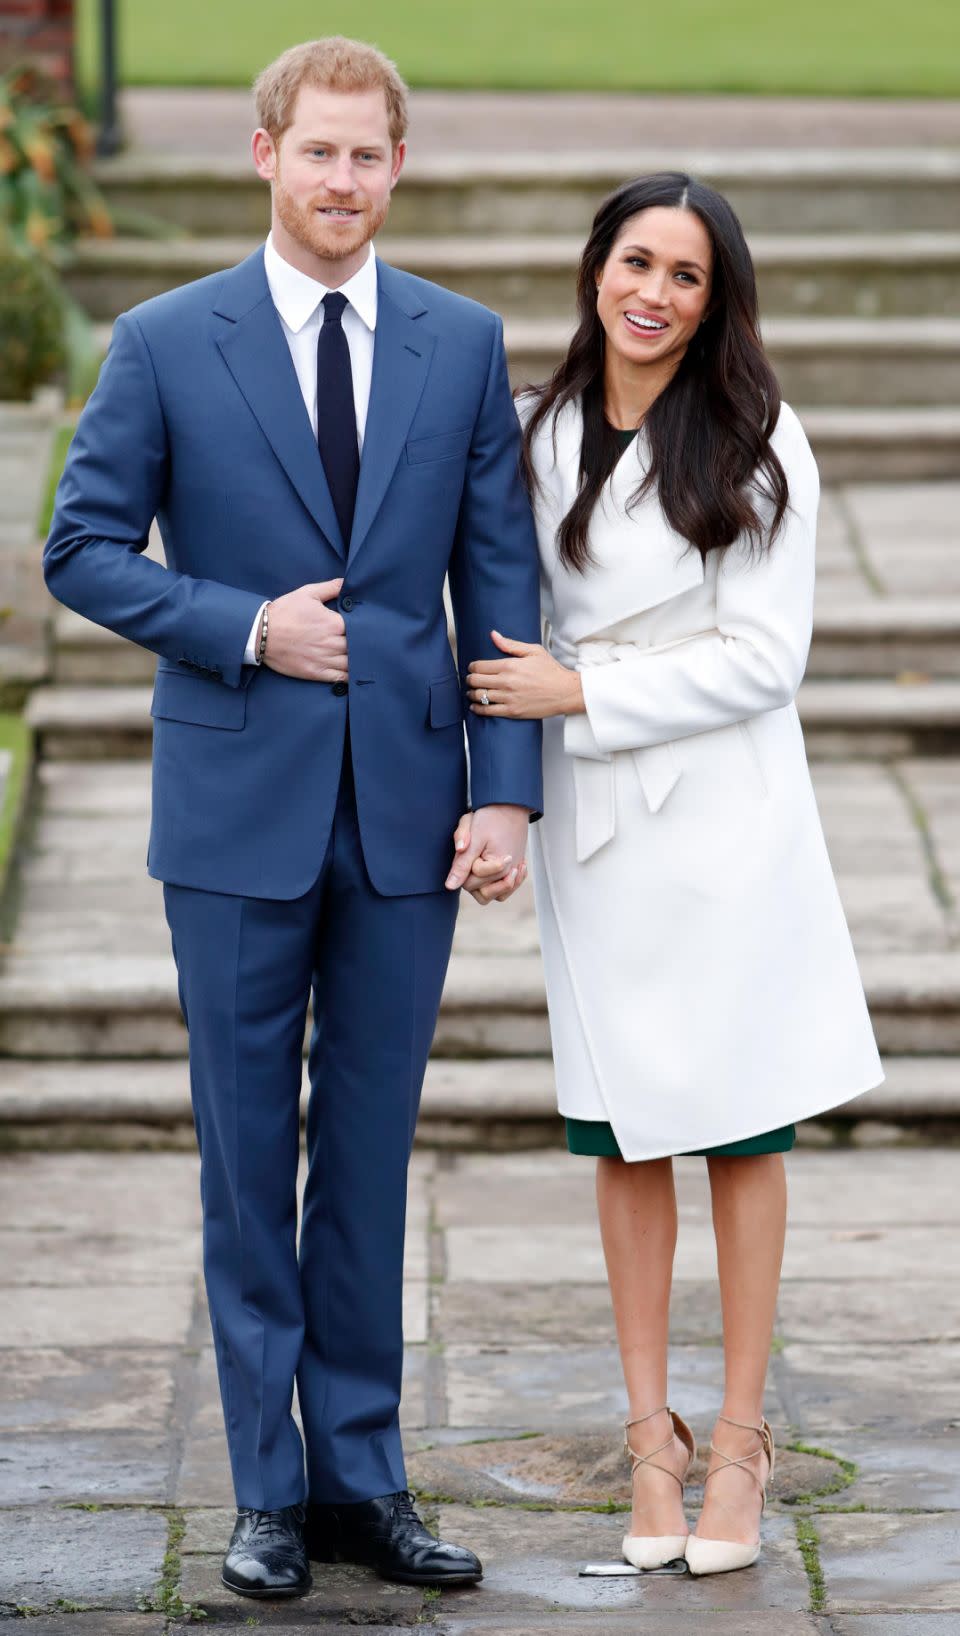 No further details about Meghan and Harry’s wedding have been revealed since it was announced it would be happening in May. Photo: Getty Images